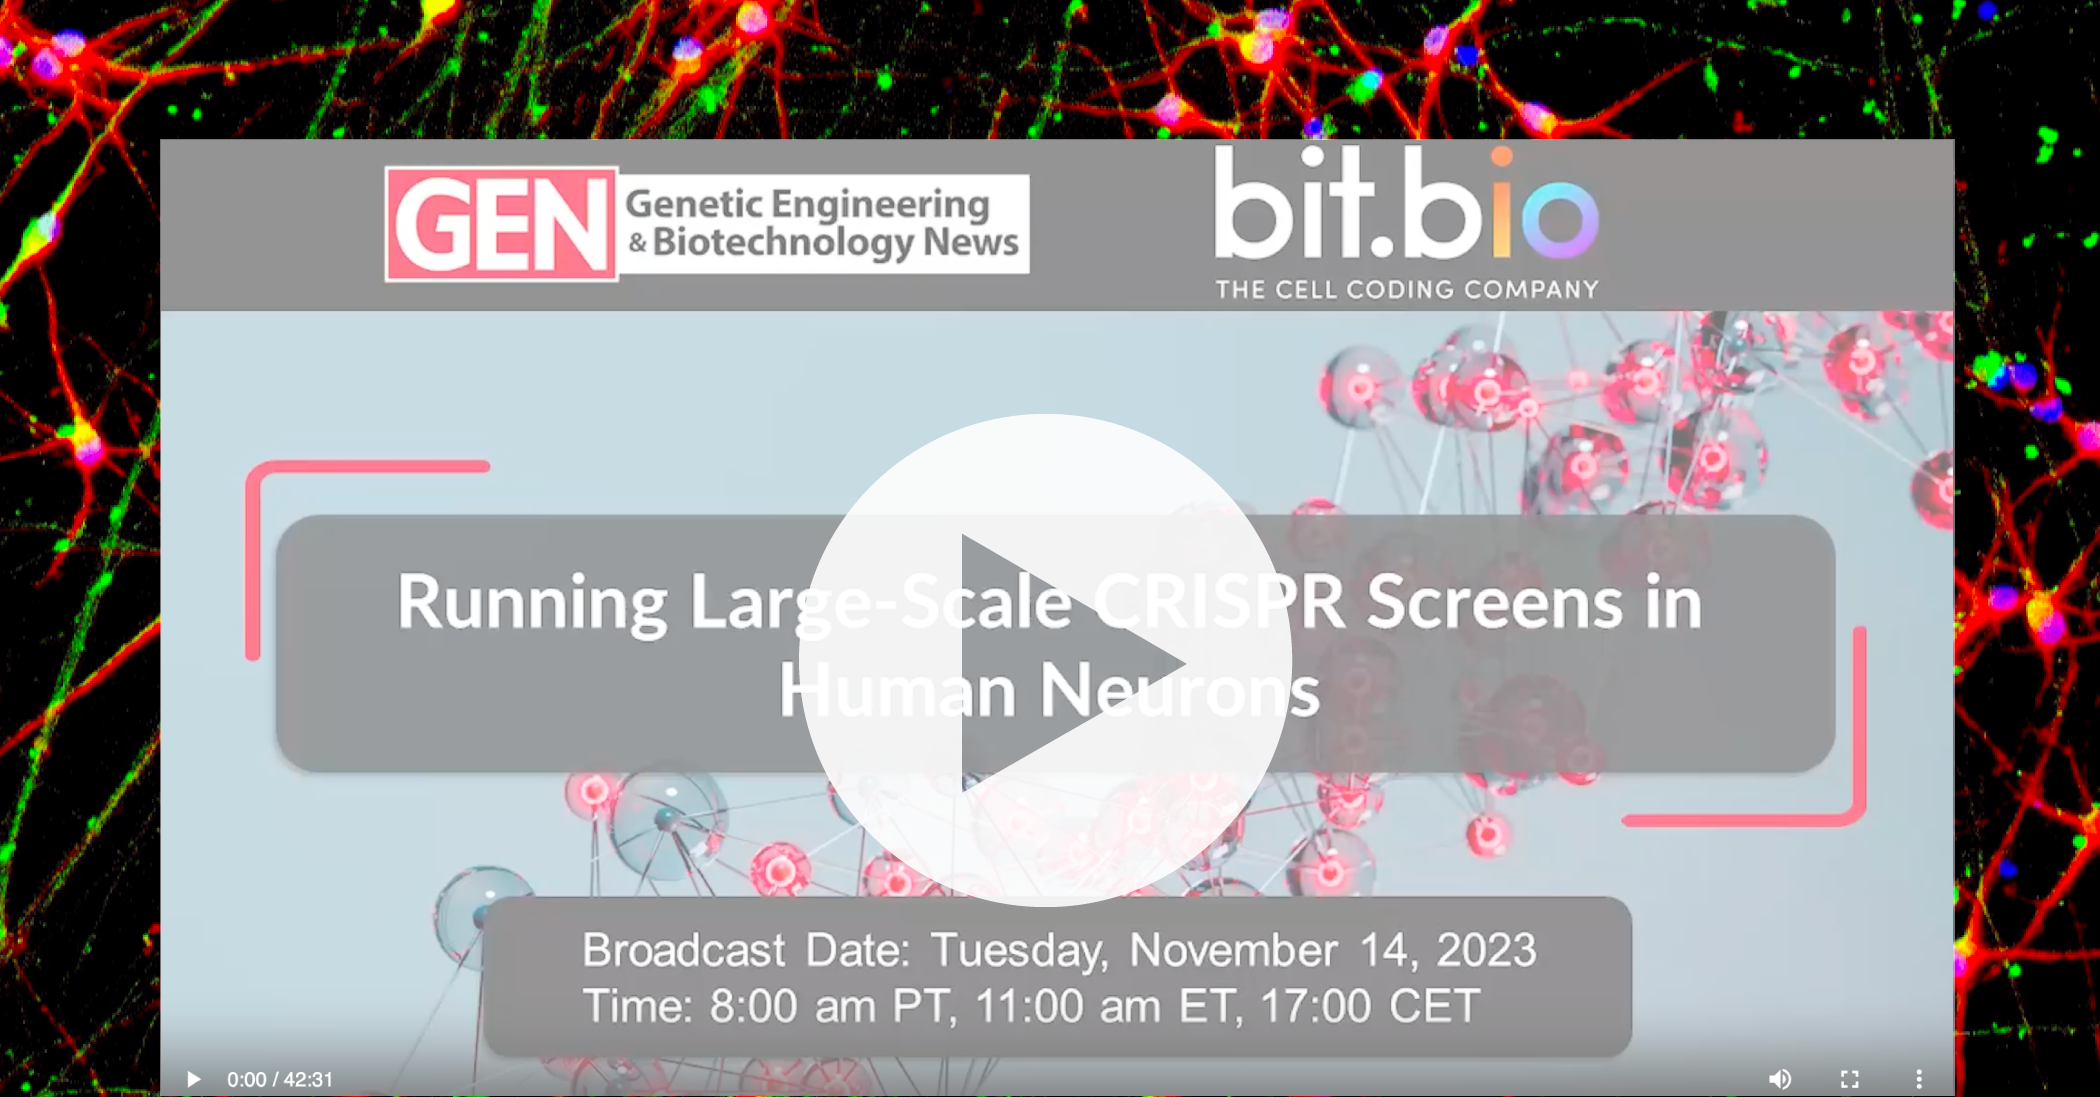 A preview of a webinar from CRISPR experts where they discuss the use of iPSC-derived cells for CRISPR gene knockout and CRISPR screens. They perform genome wide gene knockouts in iPSCs for target identification and drug discovery